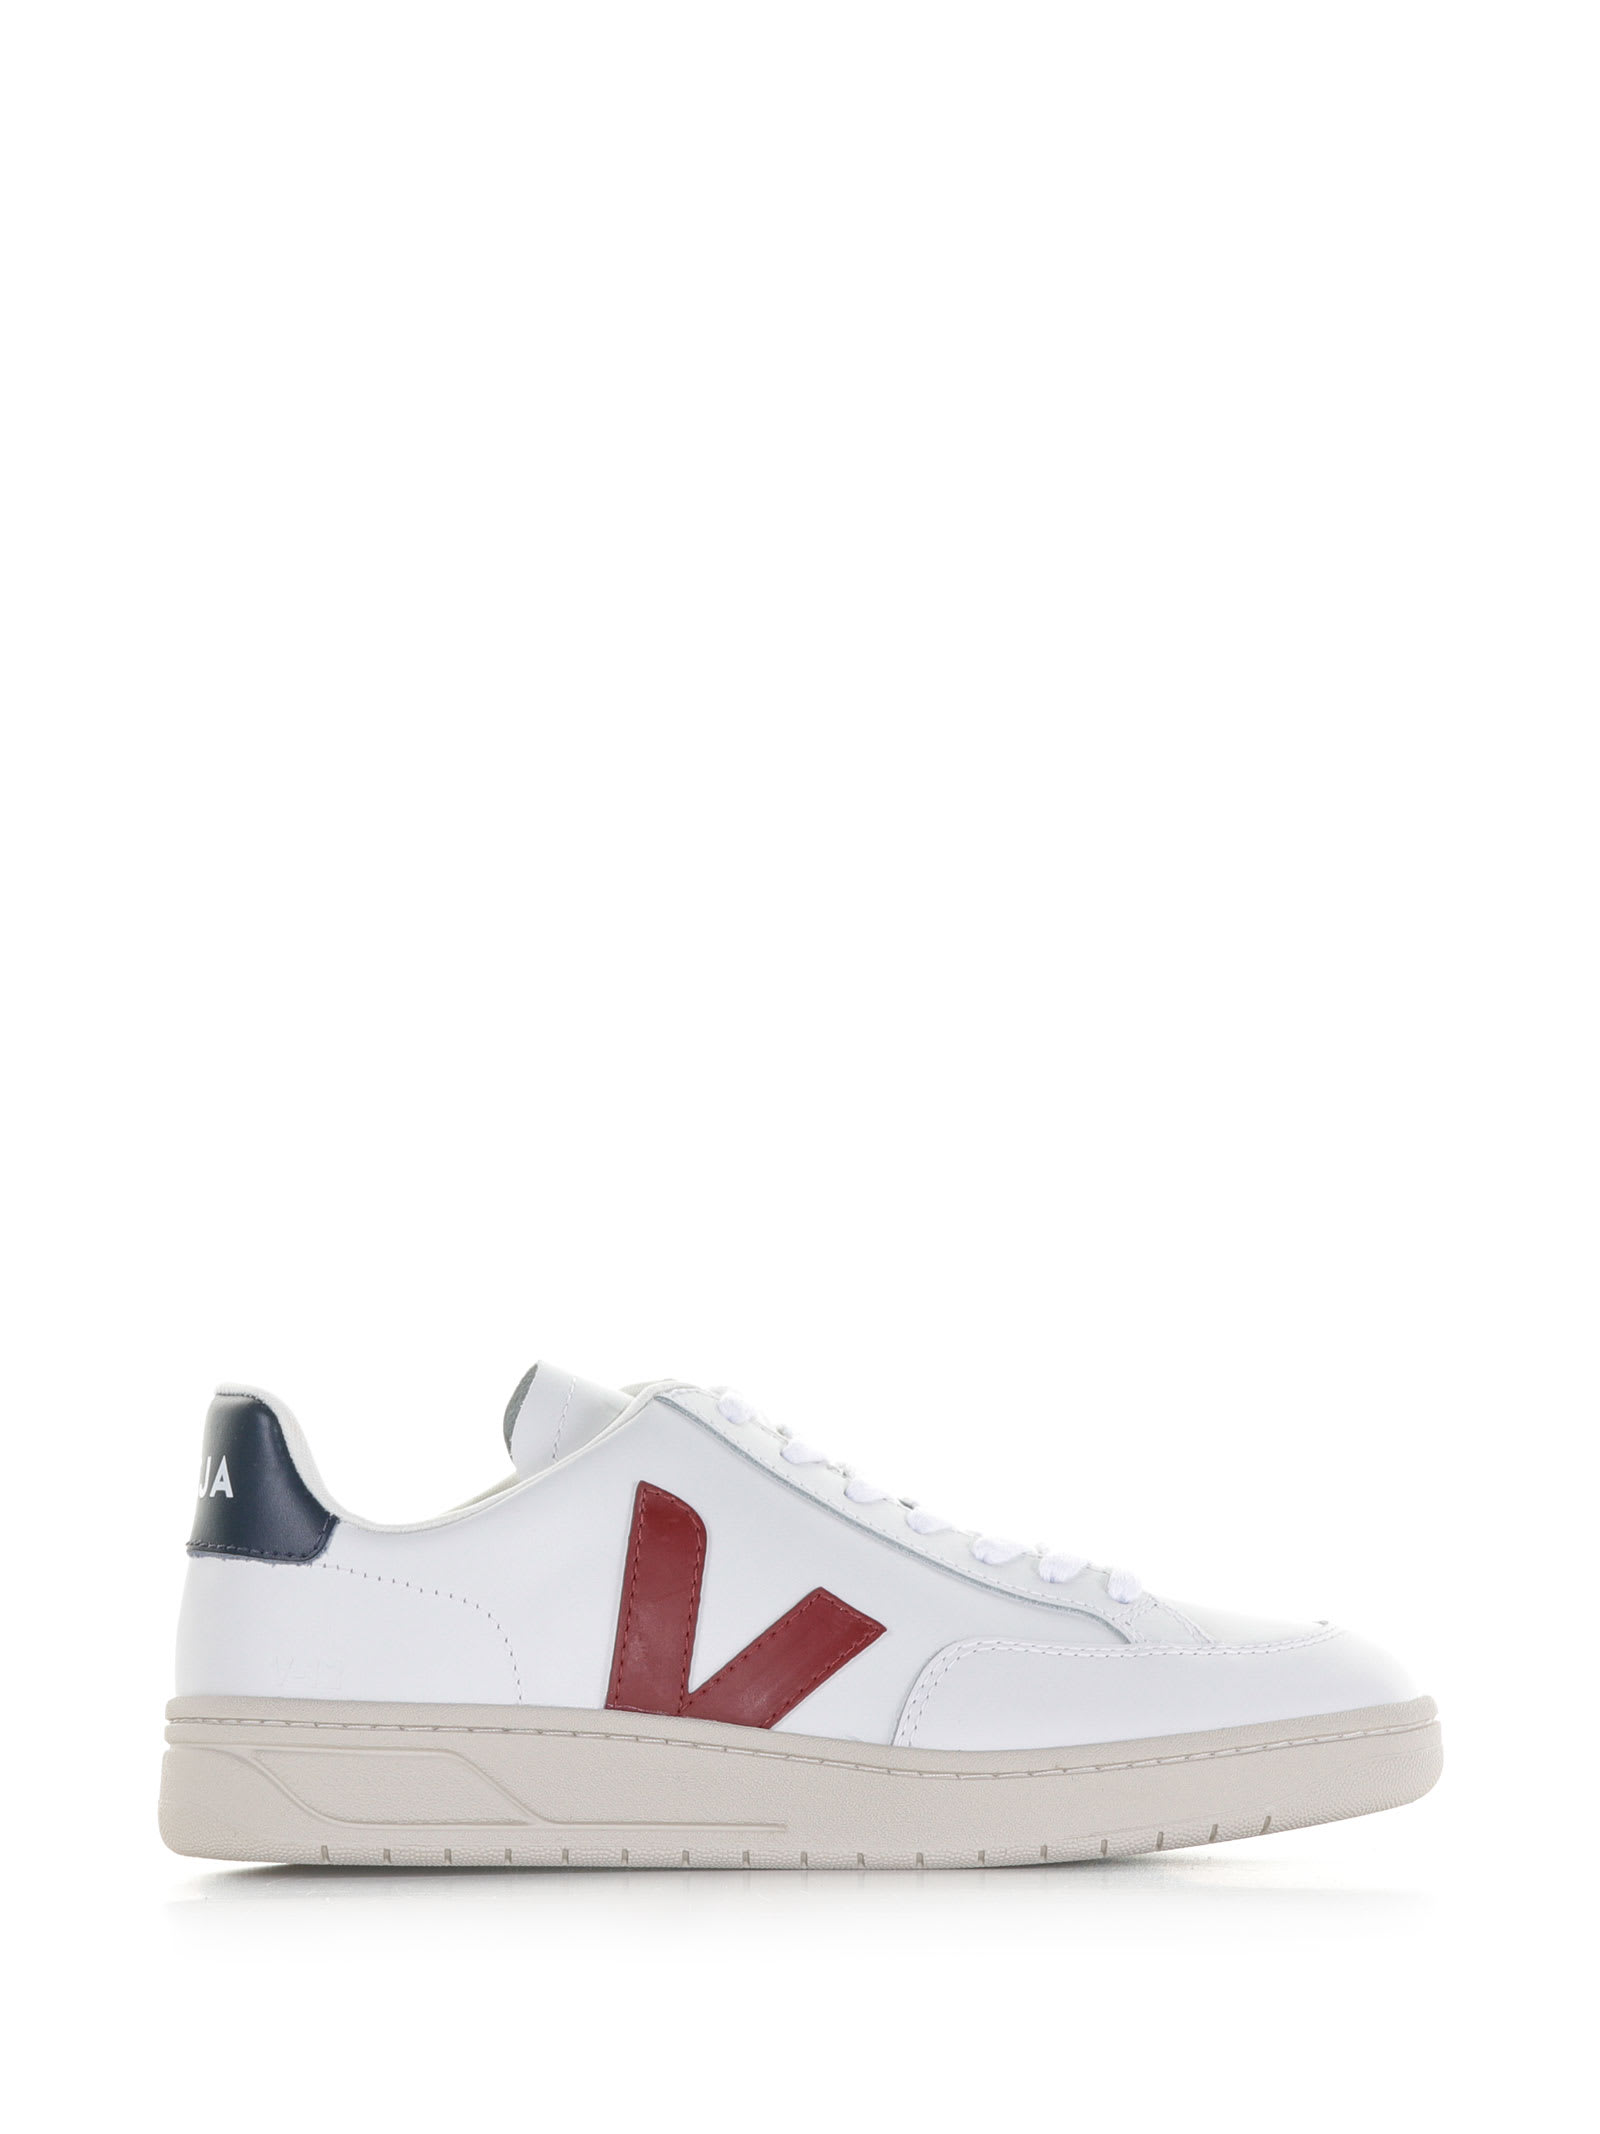 VEJA CAMPO TWO-TONE SNEAKER IN LEATHER 